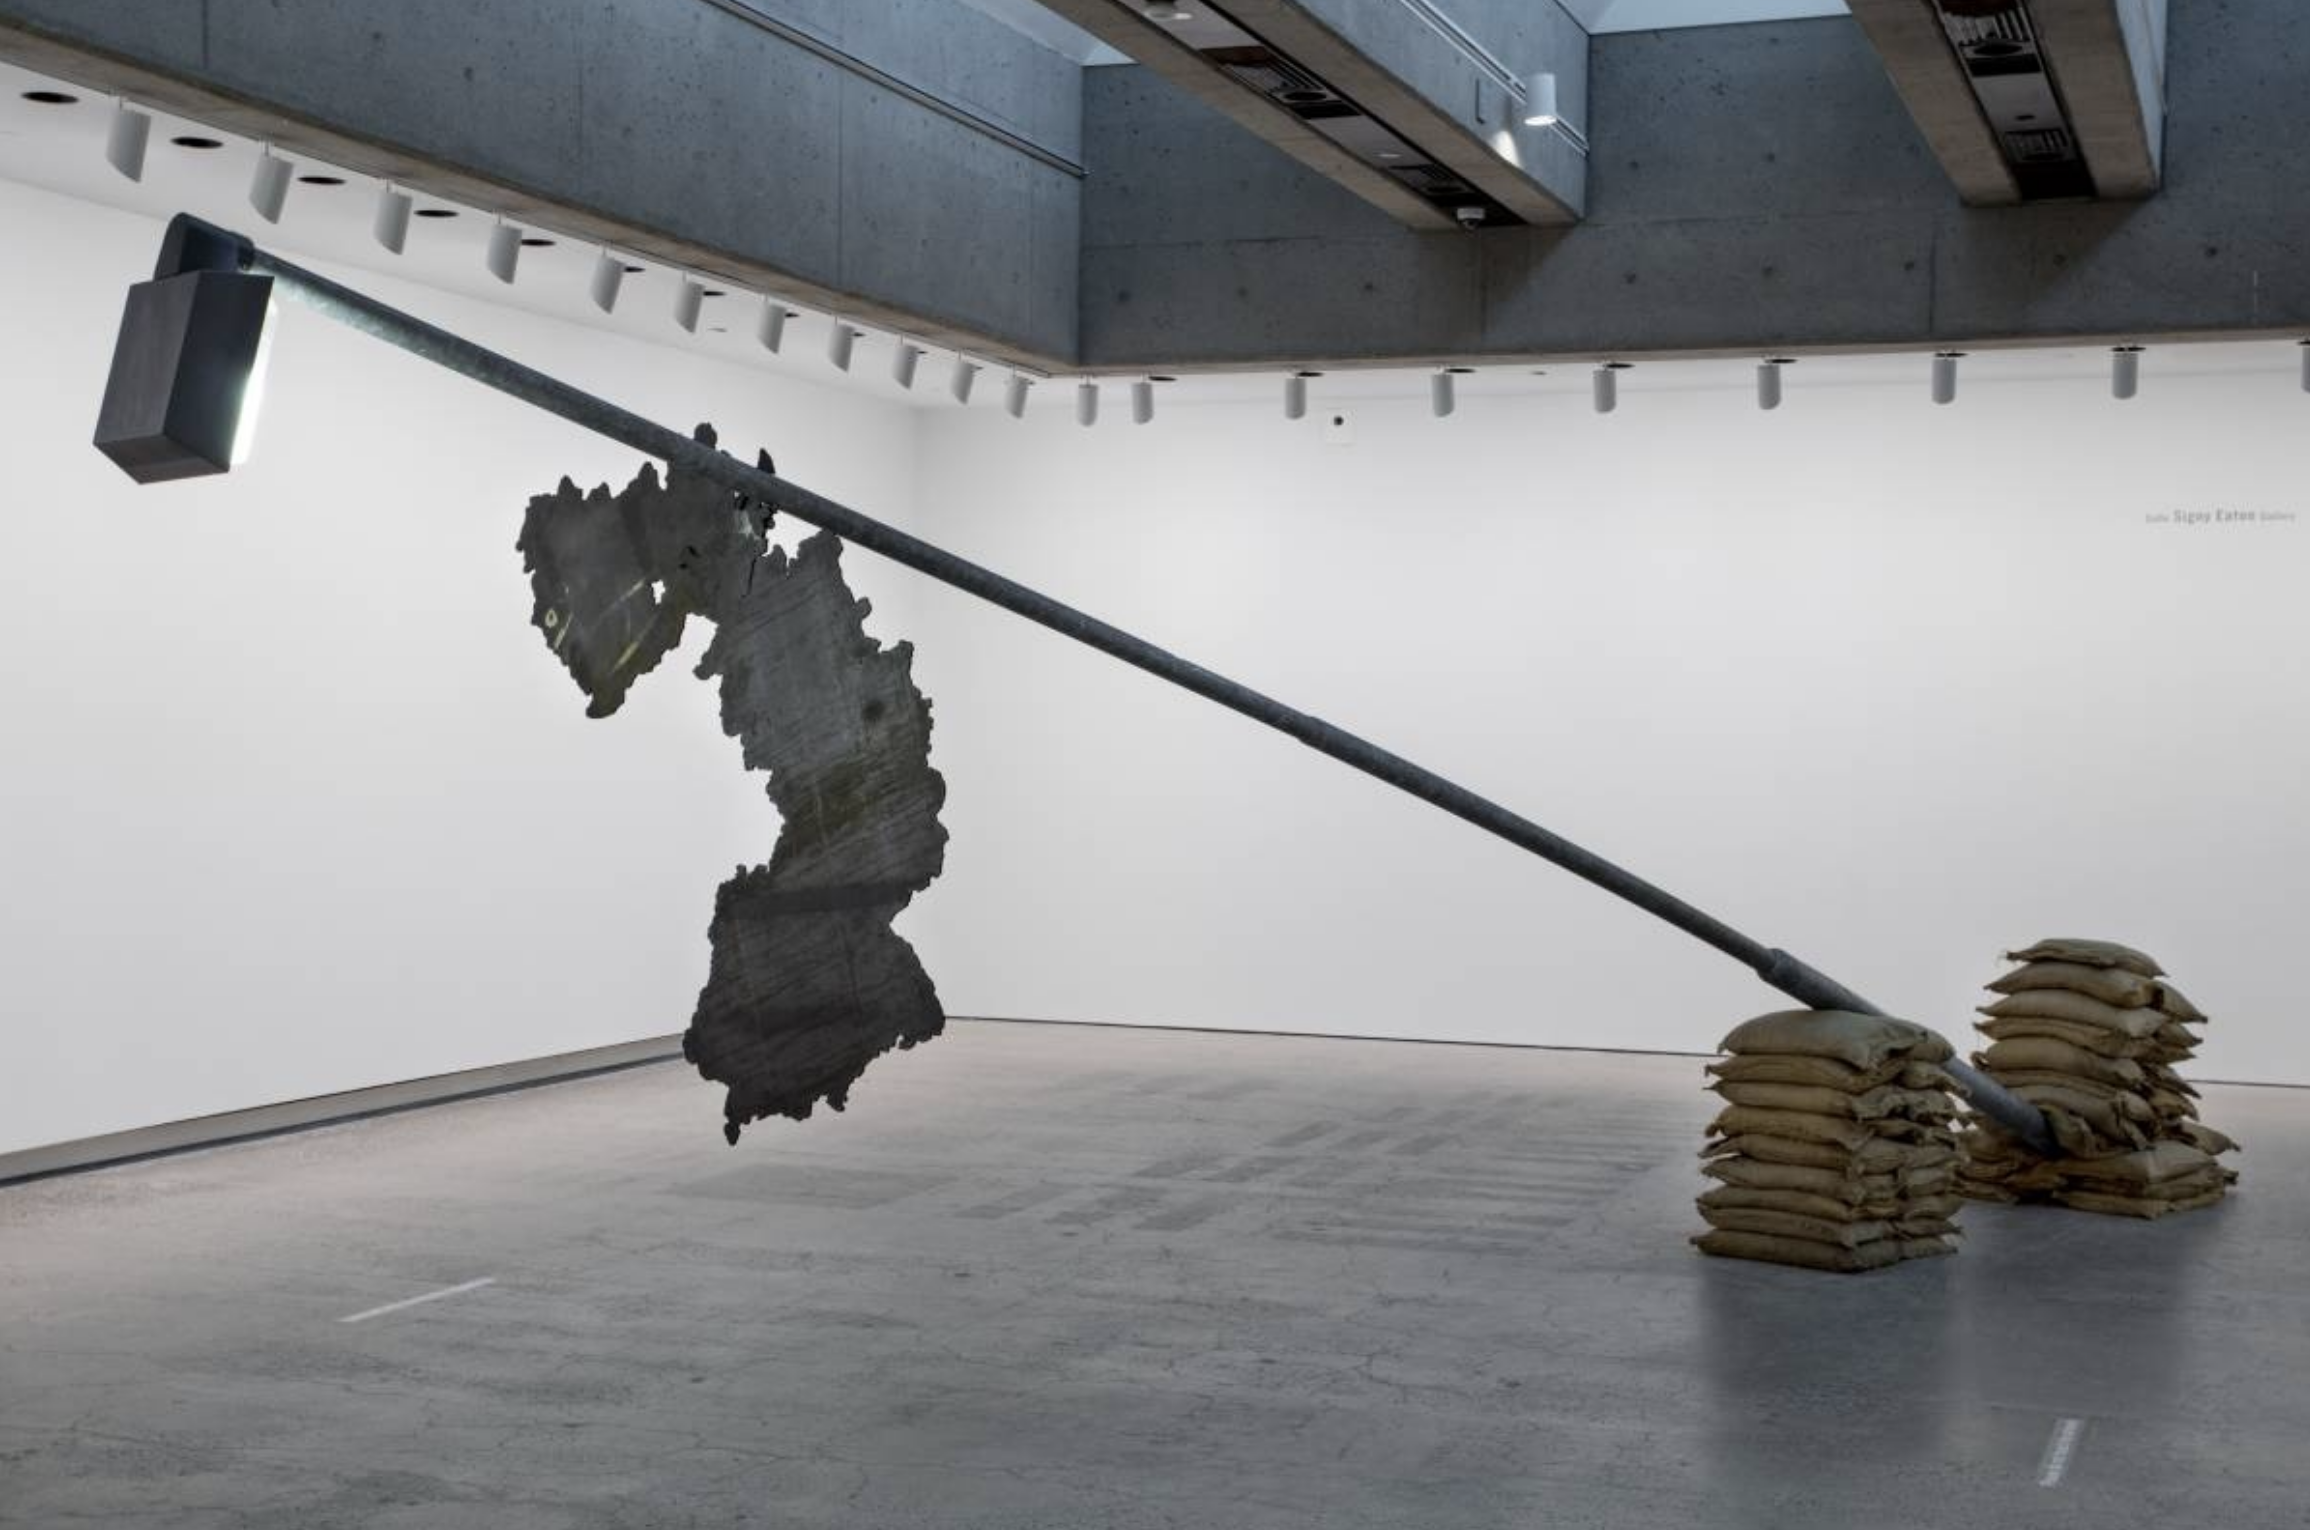 An art gallery installation reminiscent of the Arte Povera style